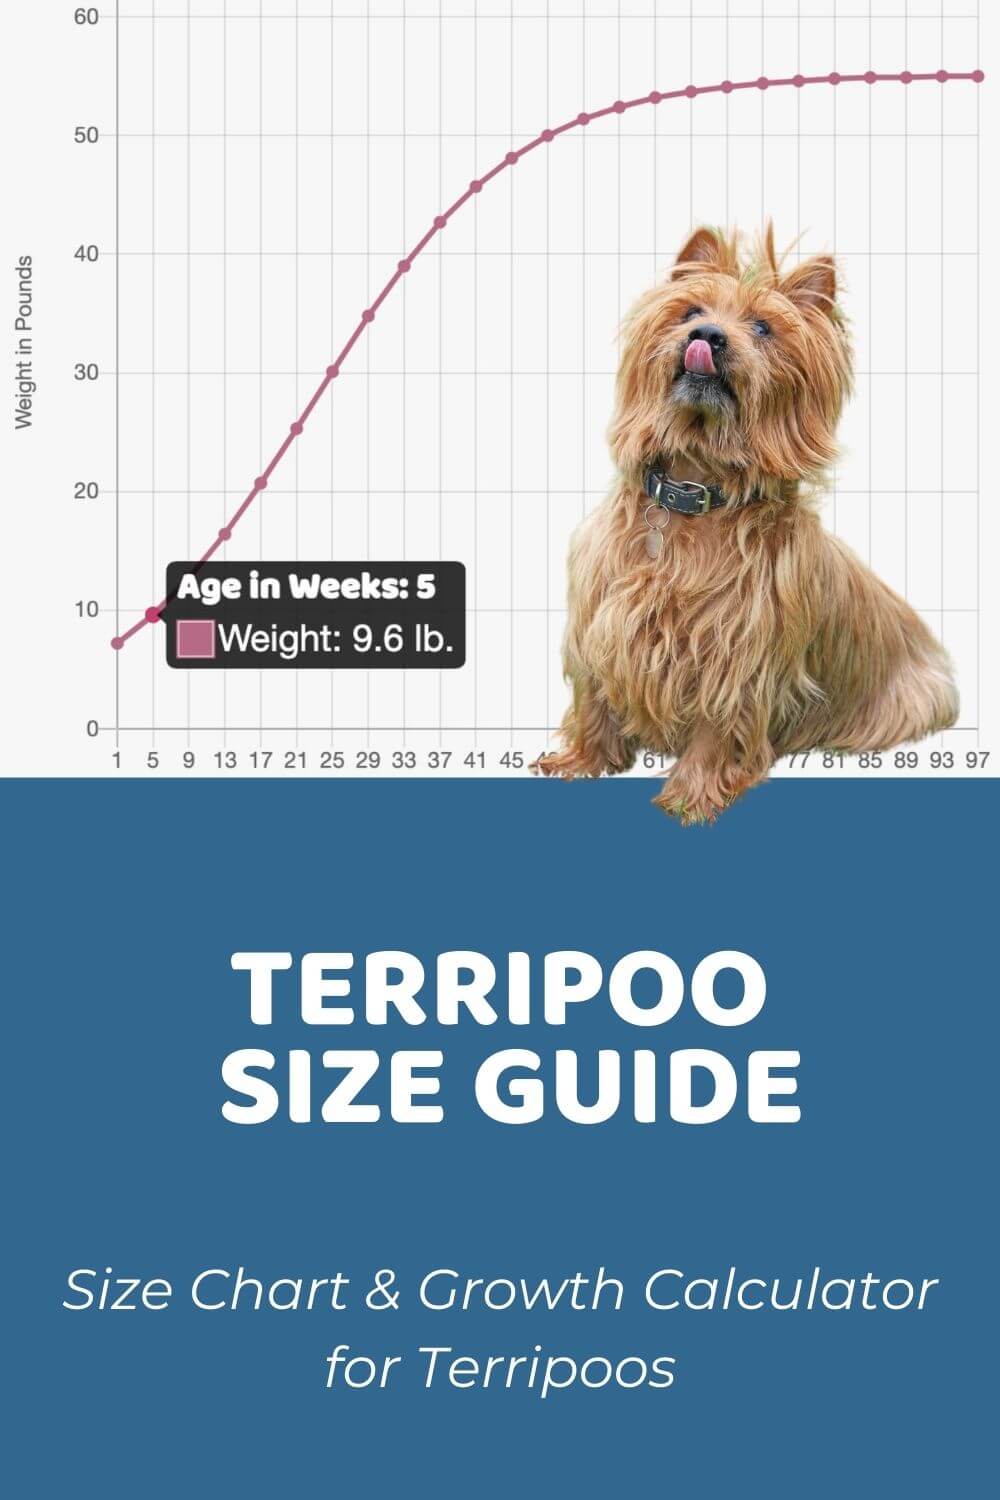 Terripoo Size Chart, Growth Patterns & Growth Calculator